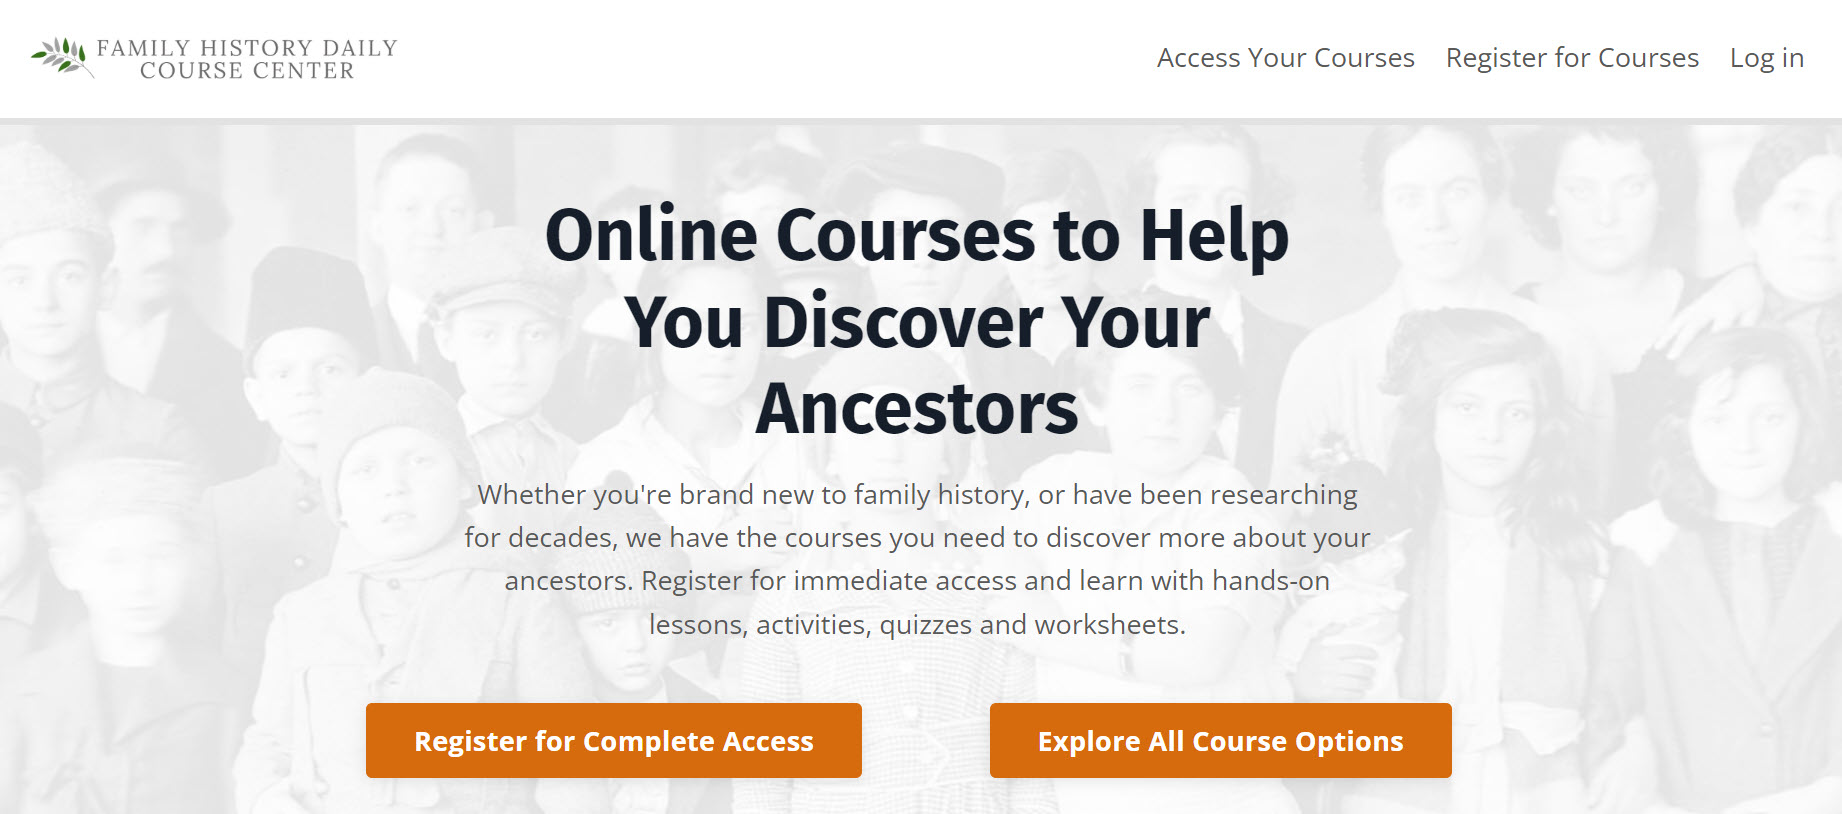 Whether you're brand new to family history, or have been researching for decades, we have the courses you need to discover more about your ancestors. Register for immediate access and learn with hands-on lessons, activities, quizzes and worksheets. Since 2013 Family History Daily’s genealogy articles and courses have been helping family history enthusiasts discover their ancestors.